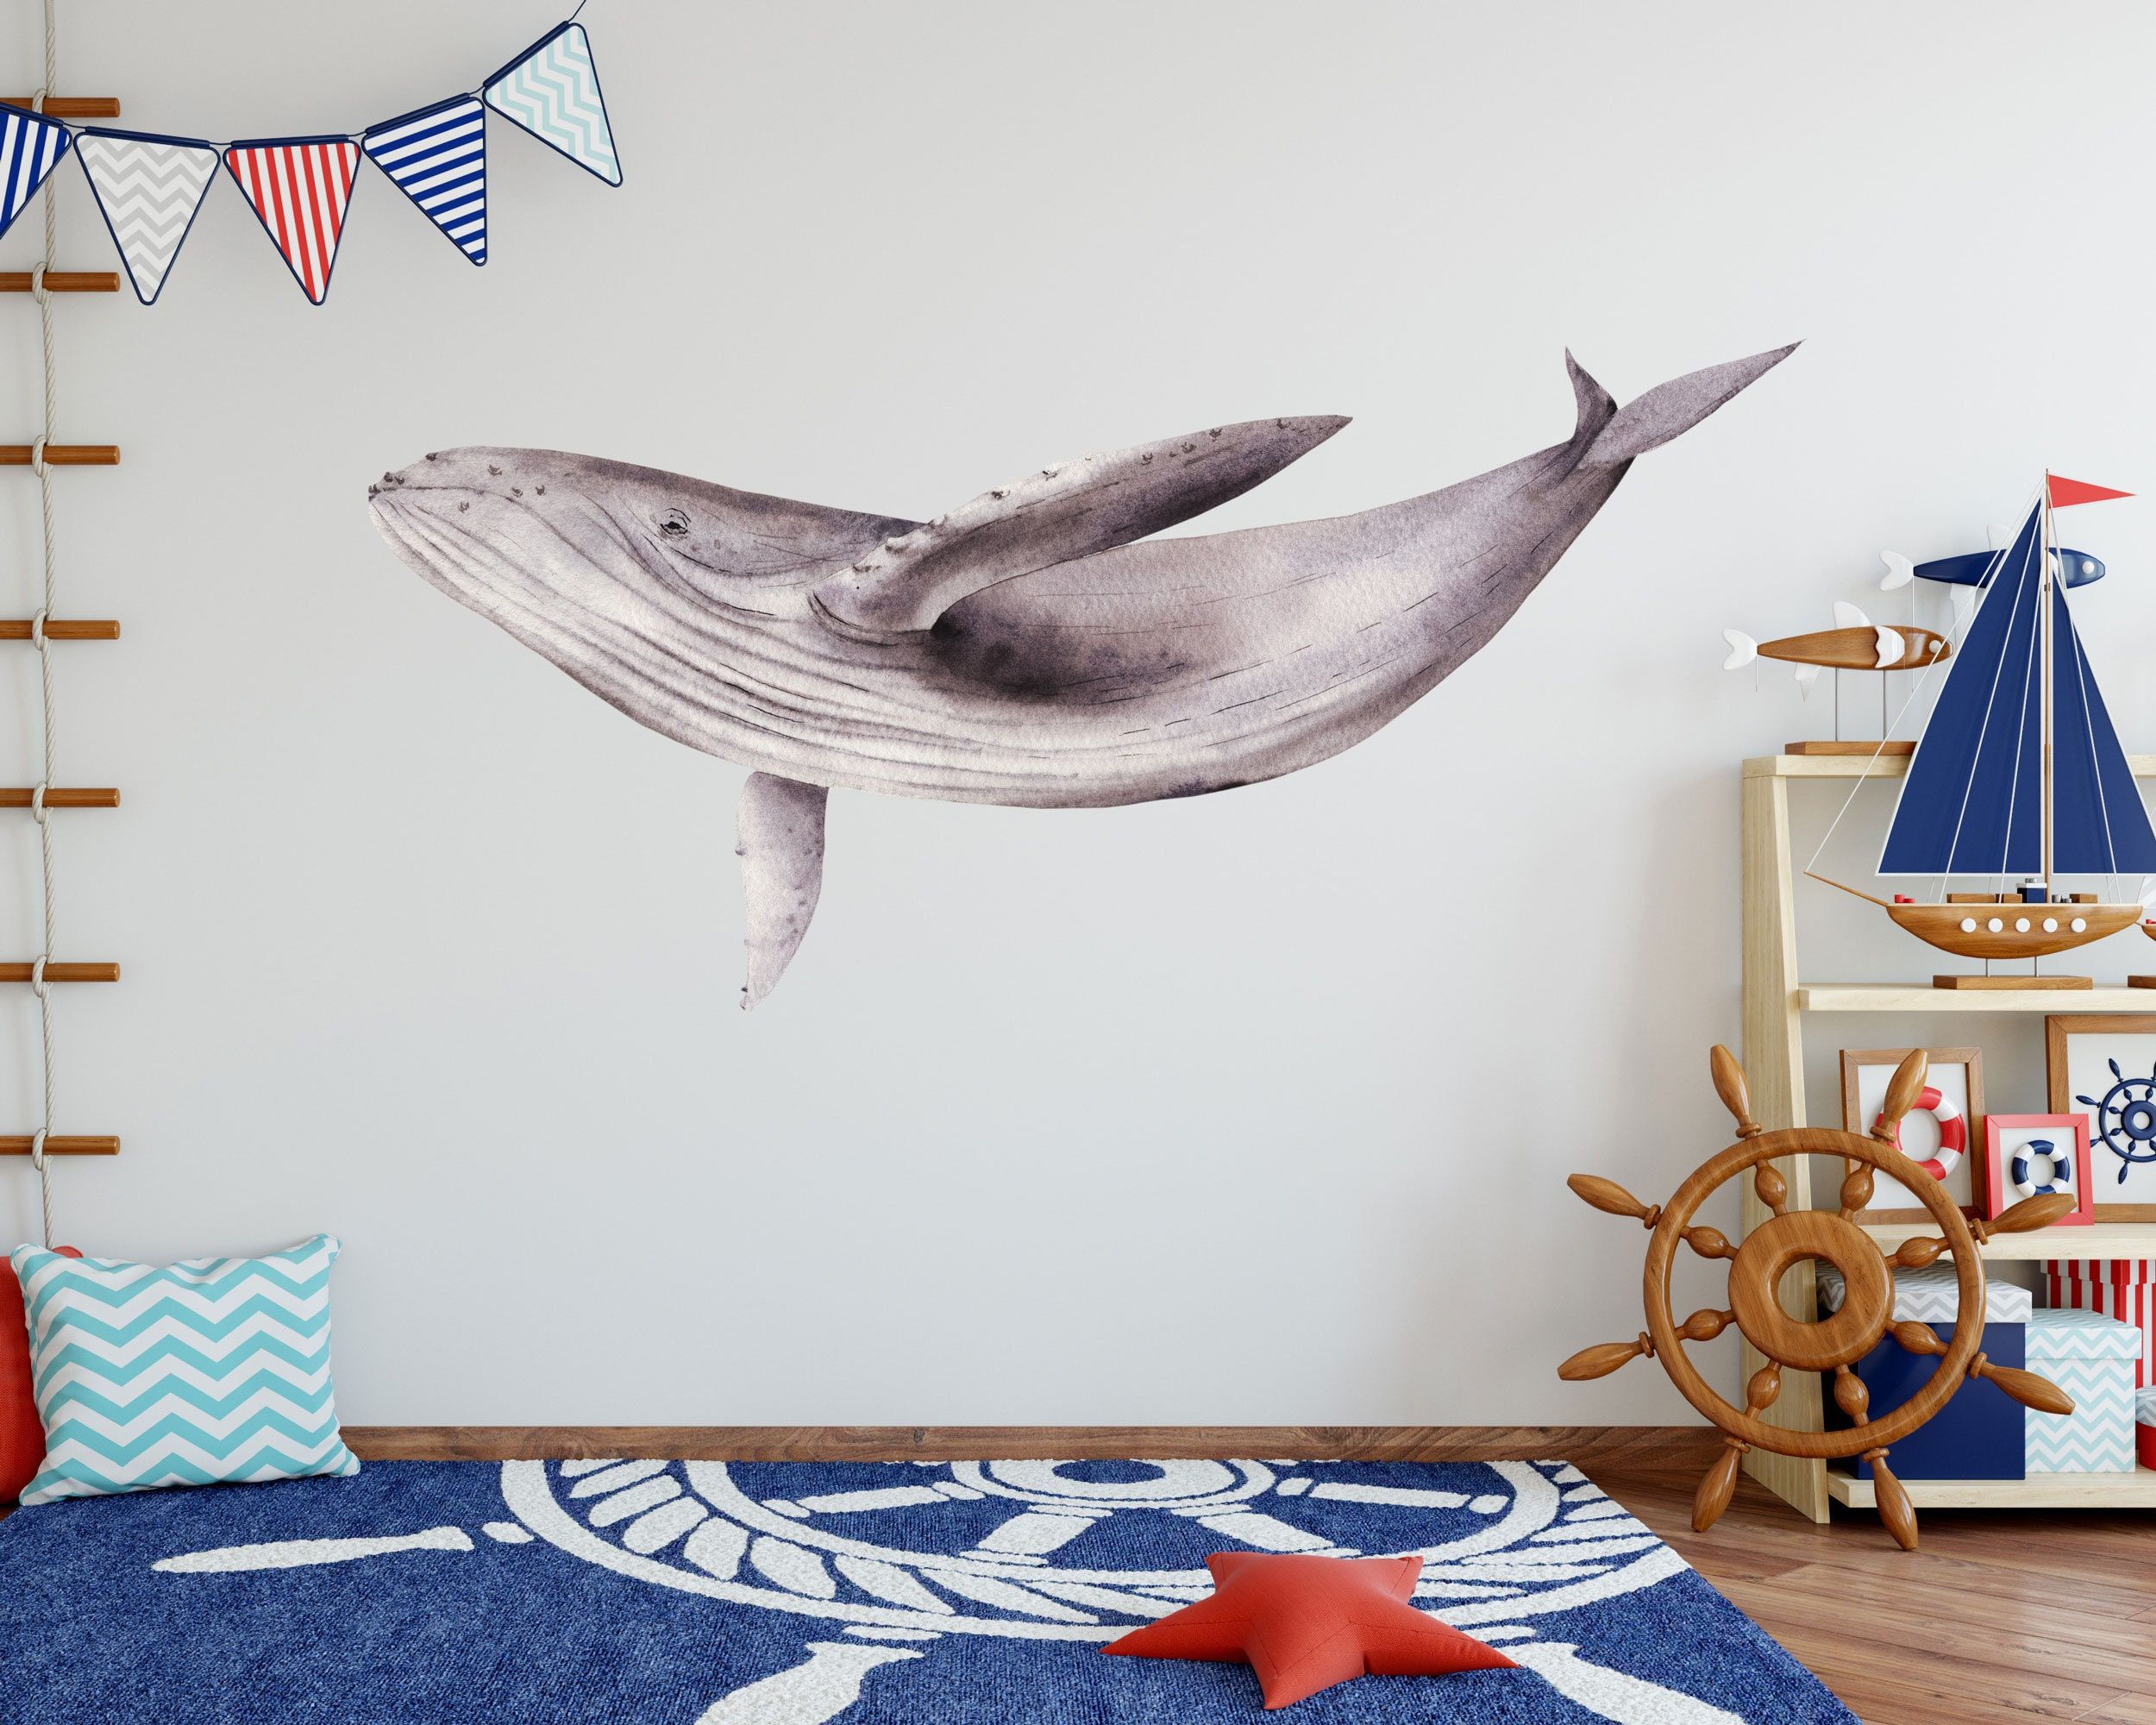 Giant Whale Wall Decal For Kids Room Decor Or Classroom Decor – Etsy Italia Regarding Whale Wall Art (View 6 of 15)